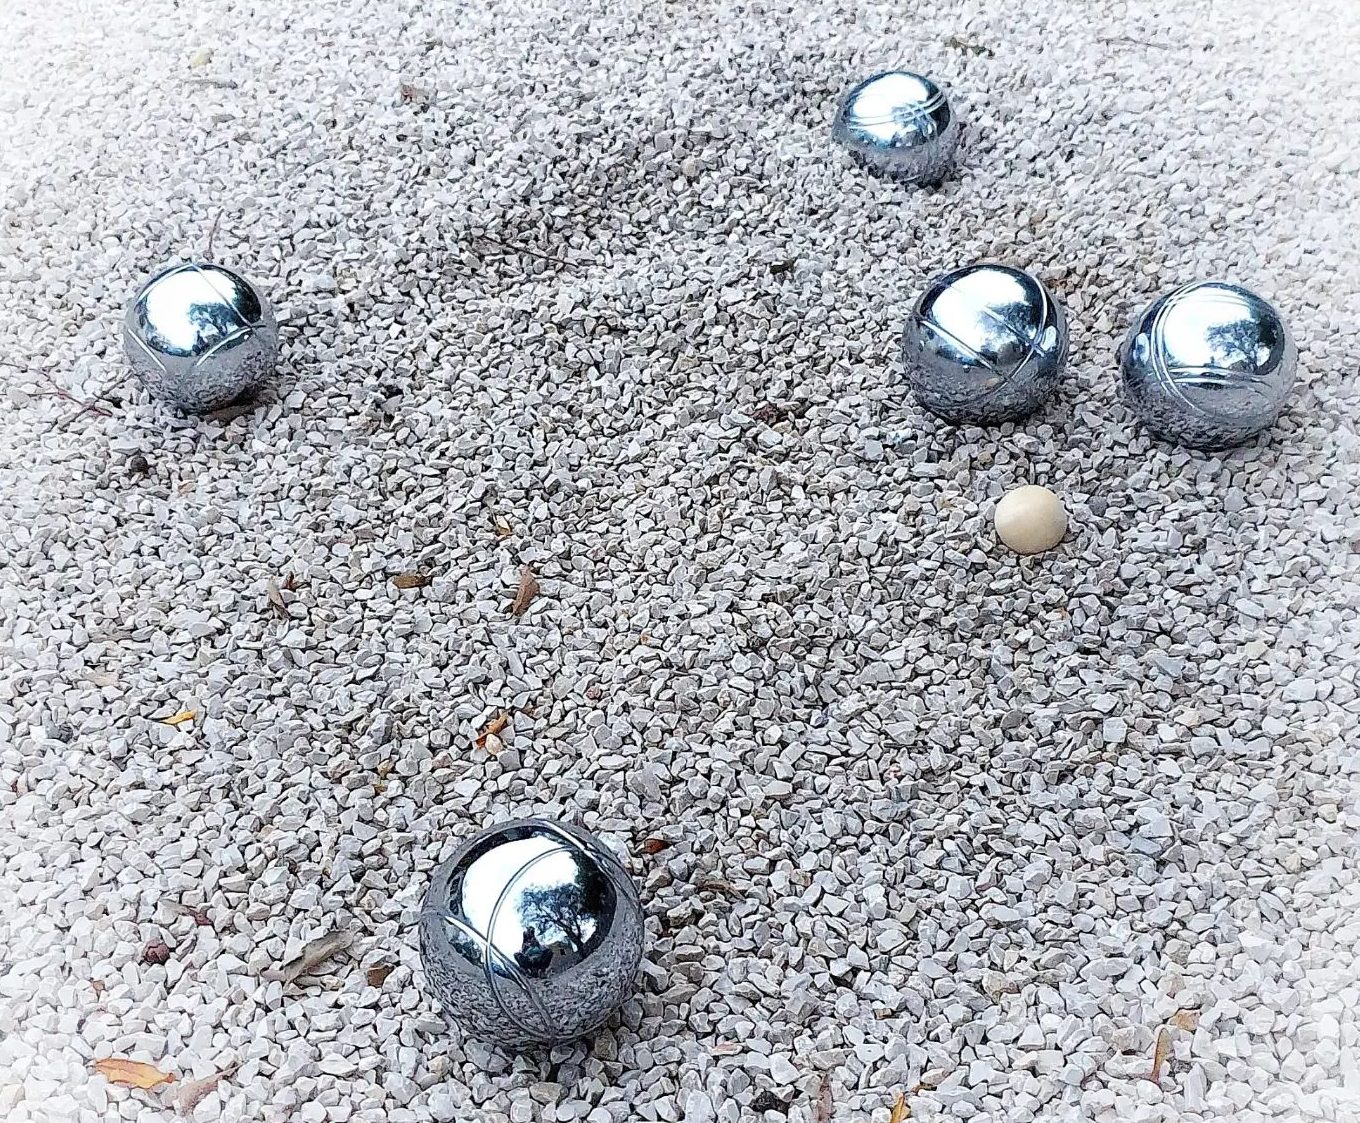 Stainless steel bocce balls